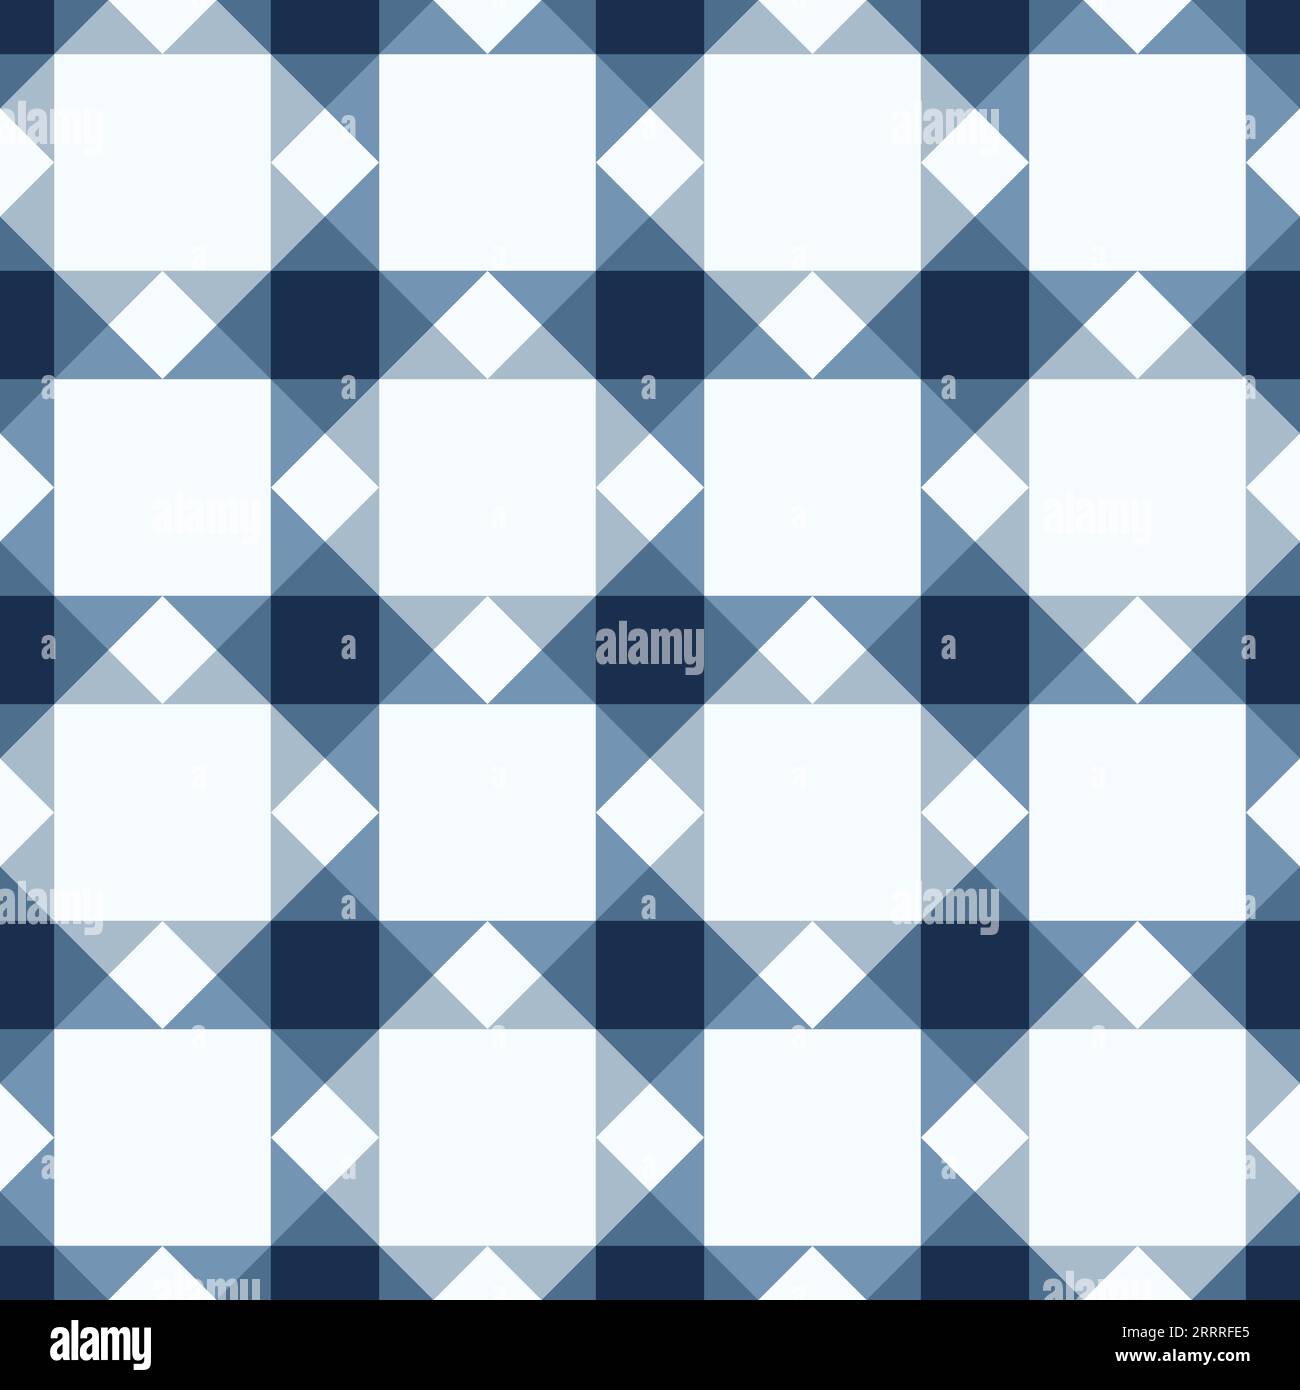 Square checks seamless pattern background Stock Vector